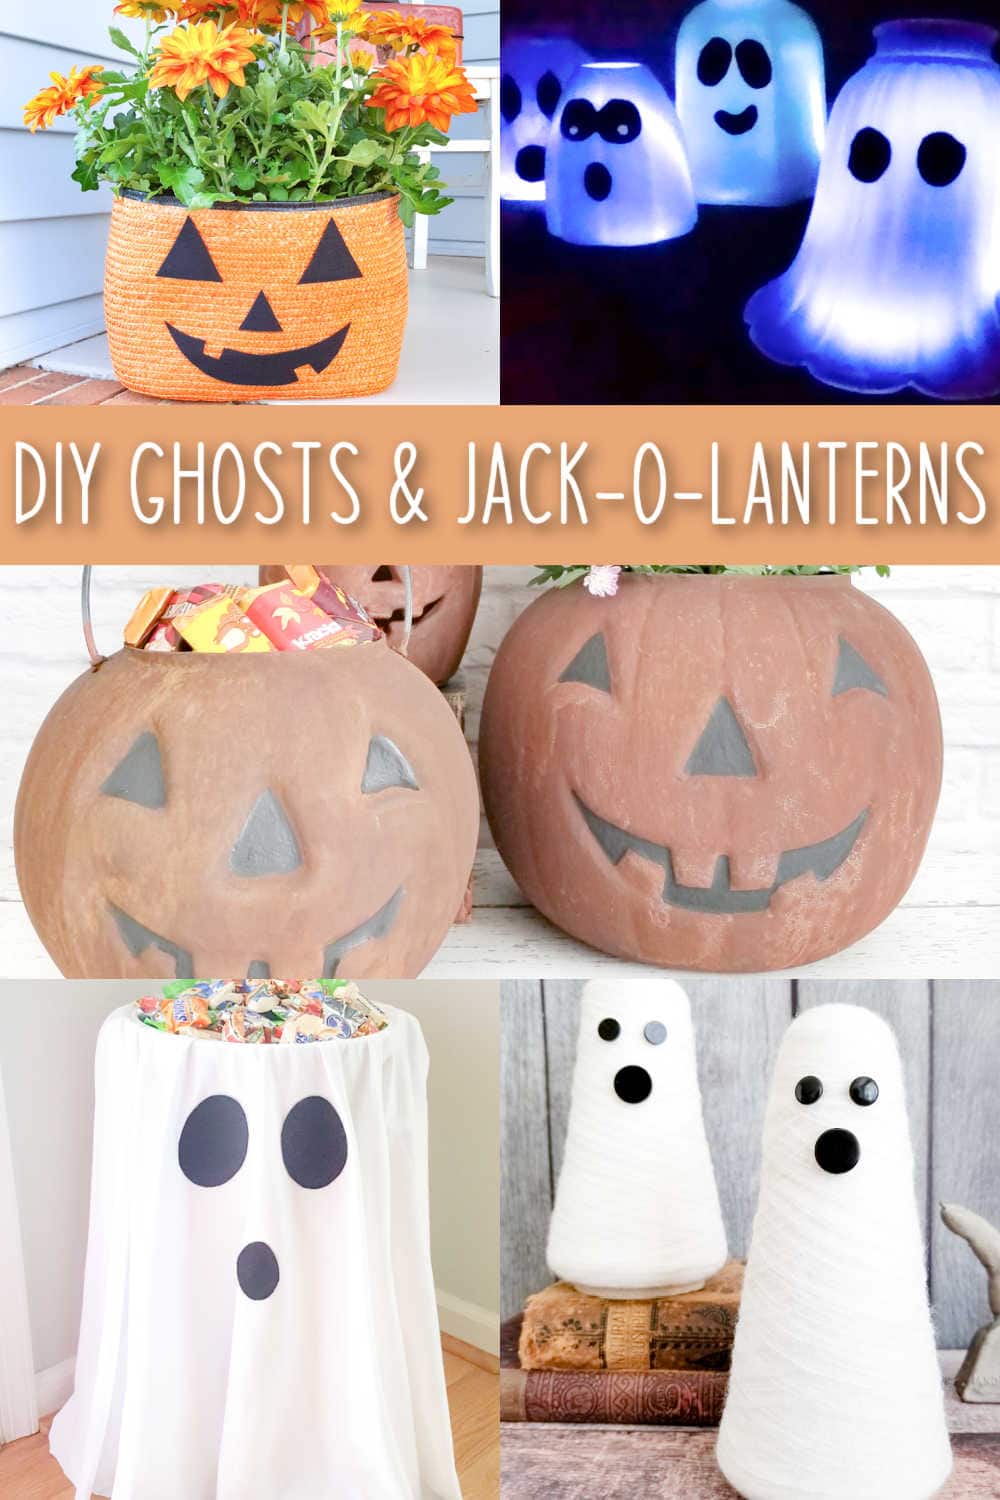 upcycling ideas for jack-o-lanterns and ghosts